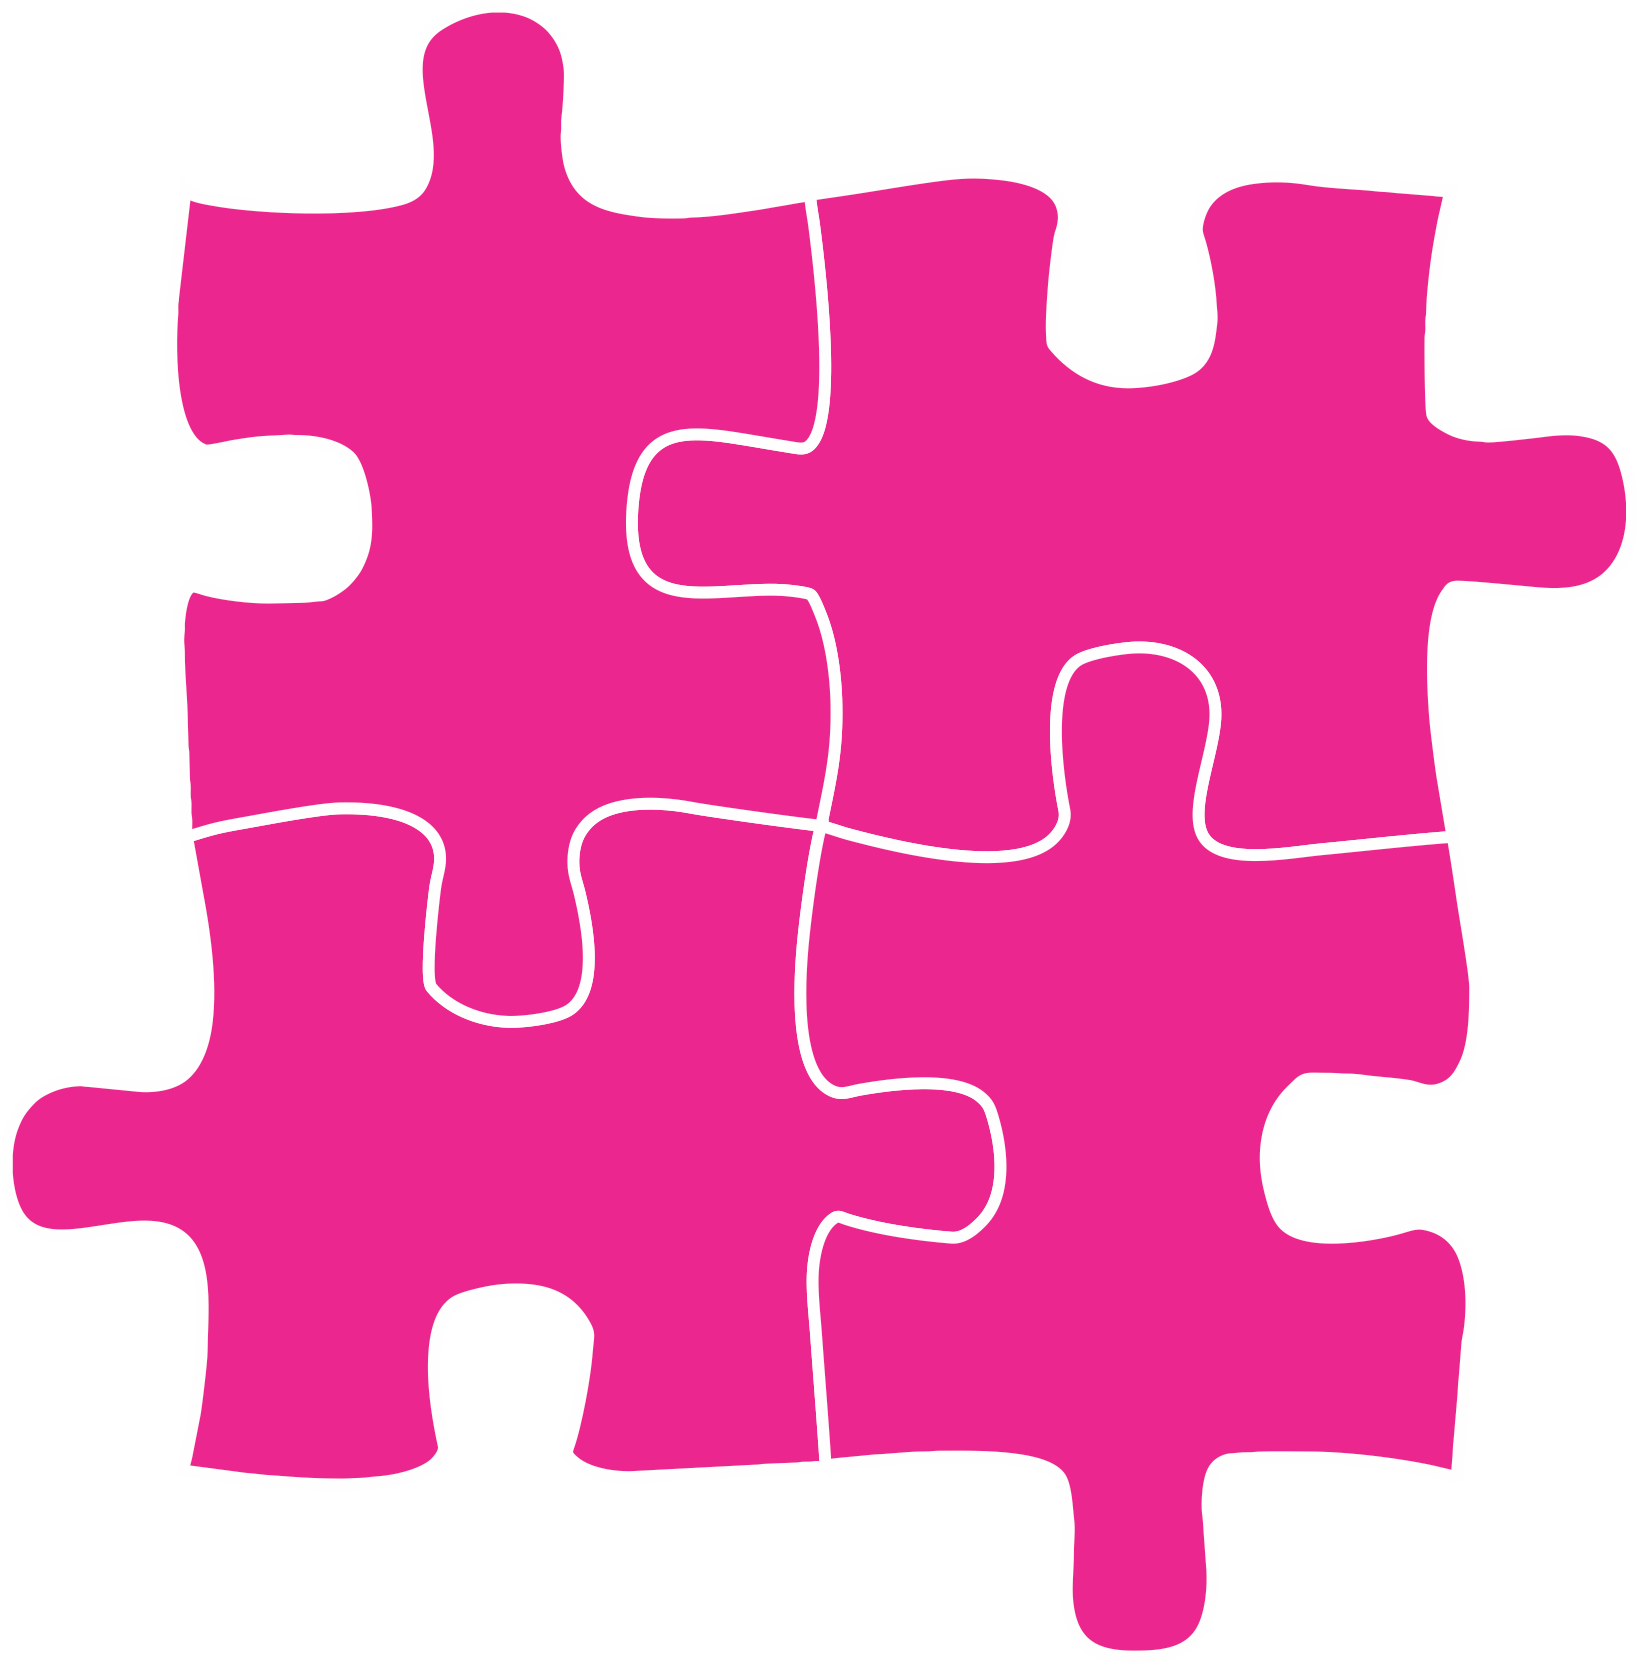 Helping hands learning center. Autism clipart pink